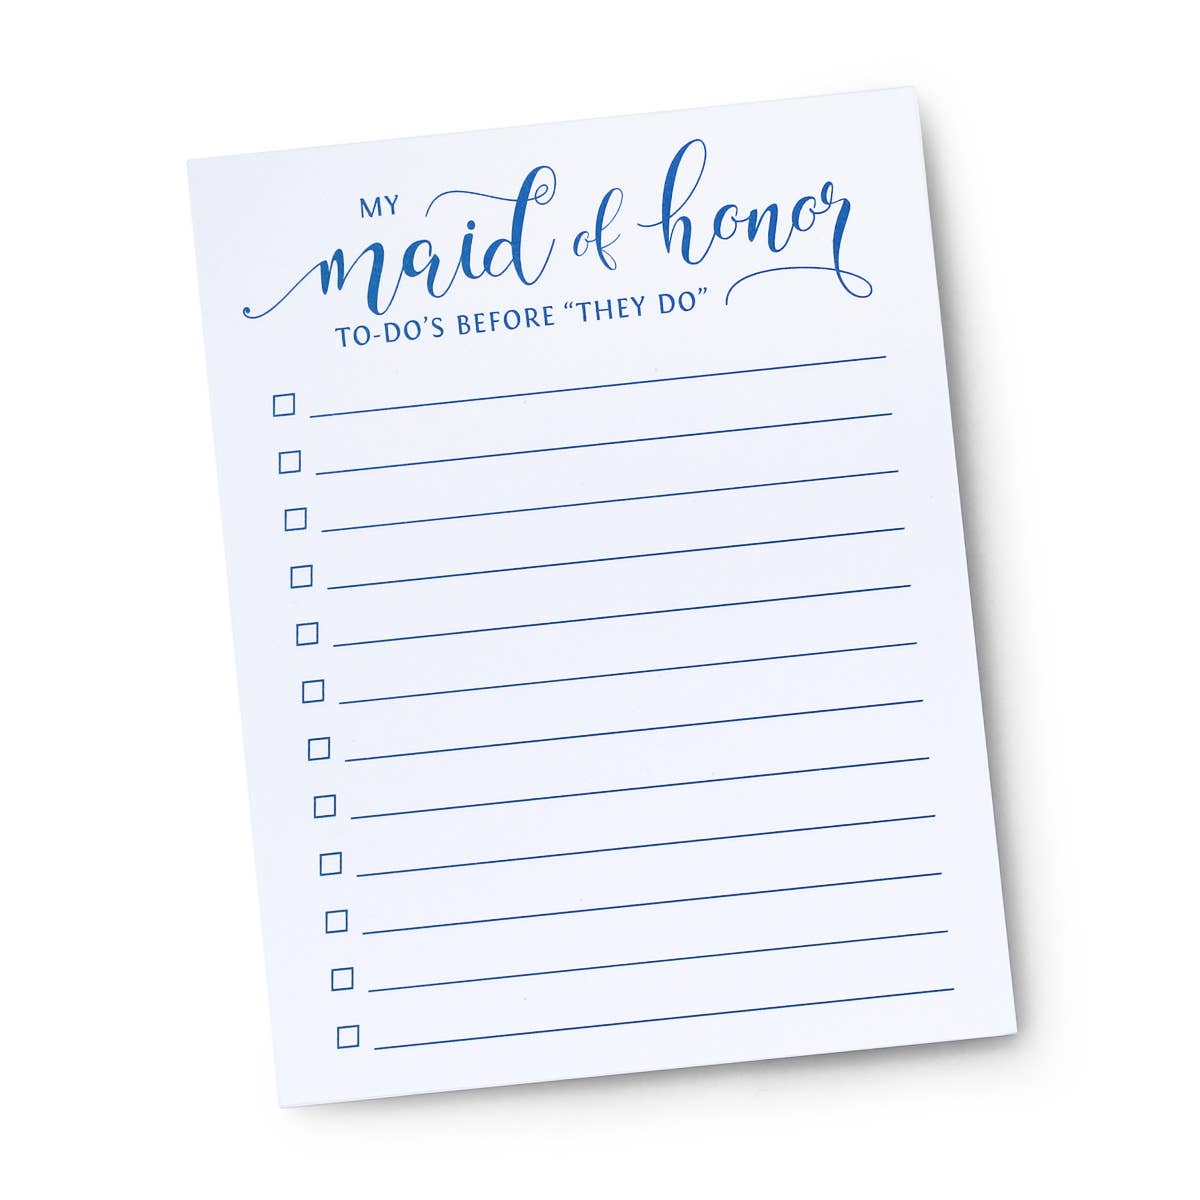 Maid of Honor To-Do's Before They Do Wedding Notepad